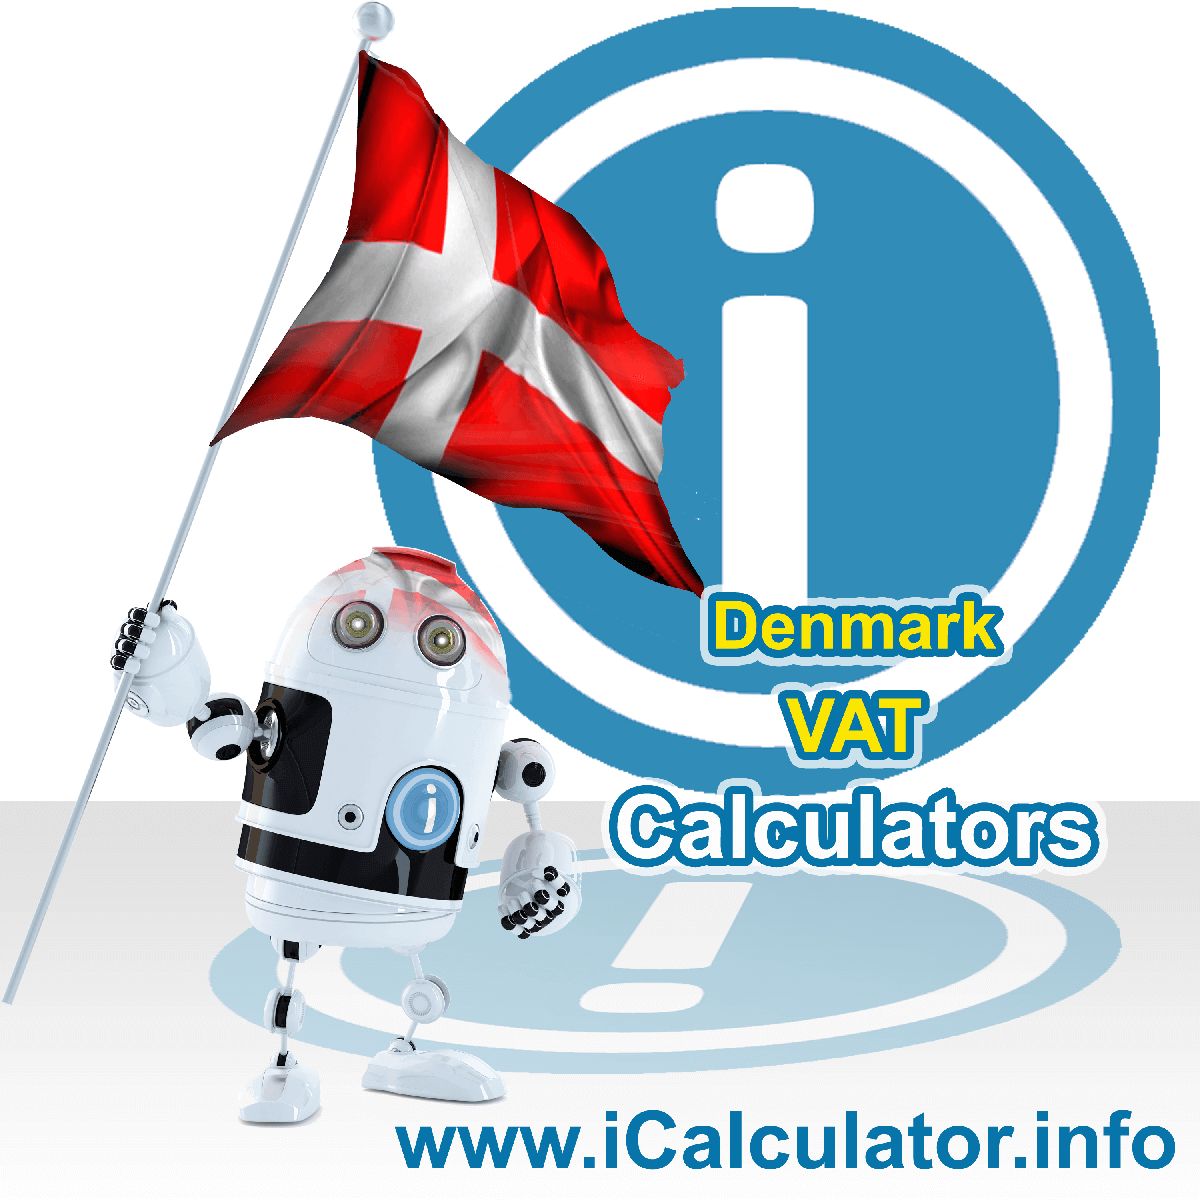 Denmark VAT Calculator. This image shows the Denmark flag and information relating to the VAT formula used for calculating Value Added Tax in Denmark using the Denmark VAT Calculator in 2023